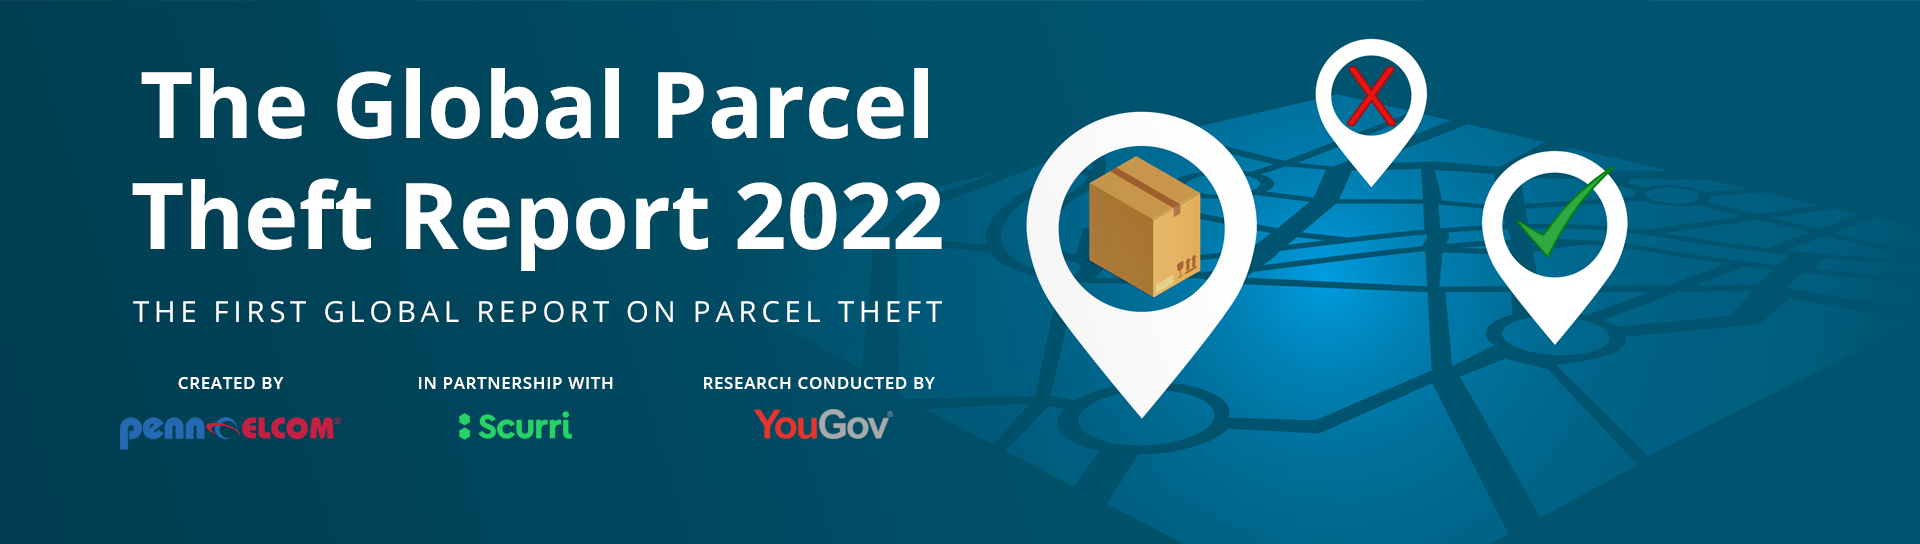 The Global Parcel Theft Report 2022